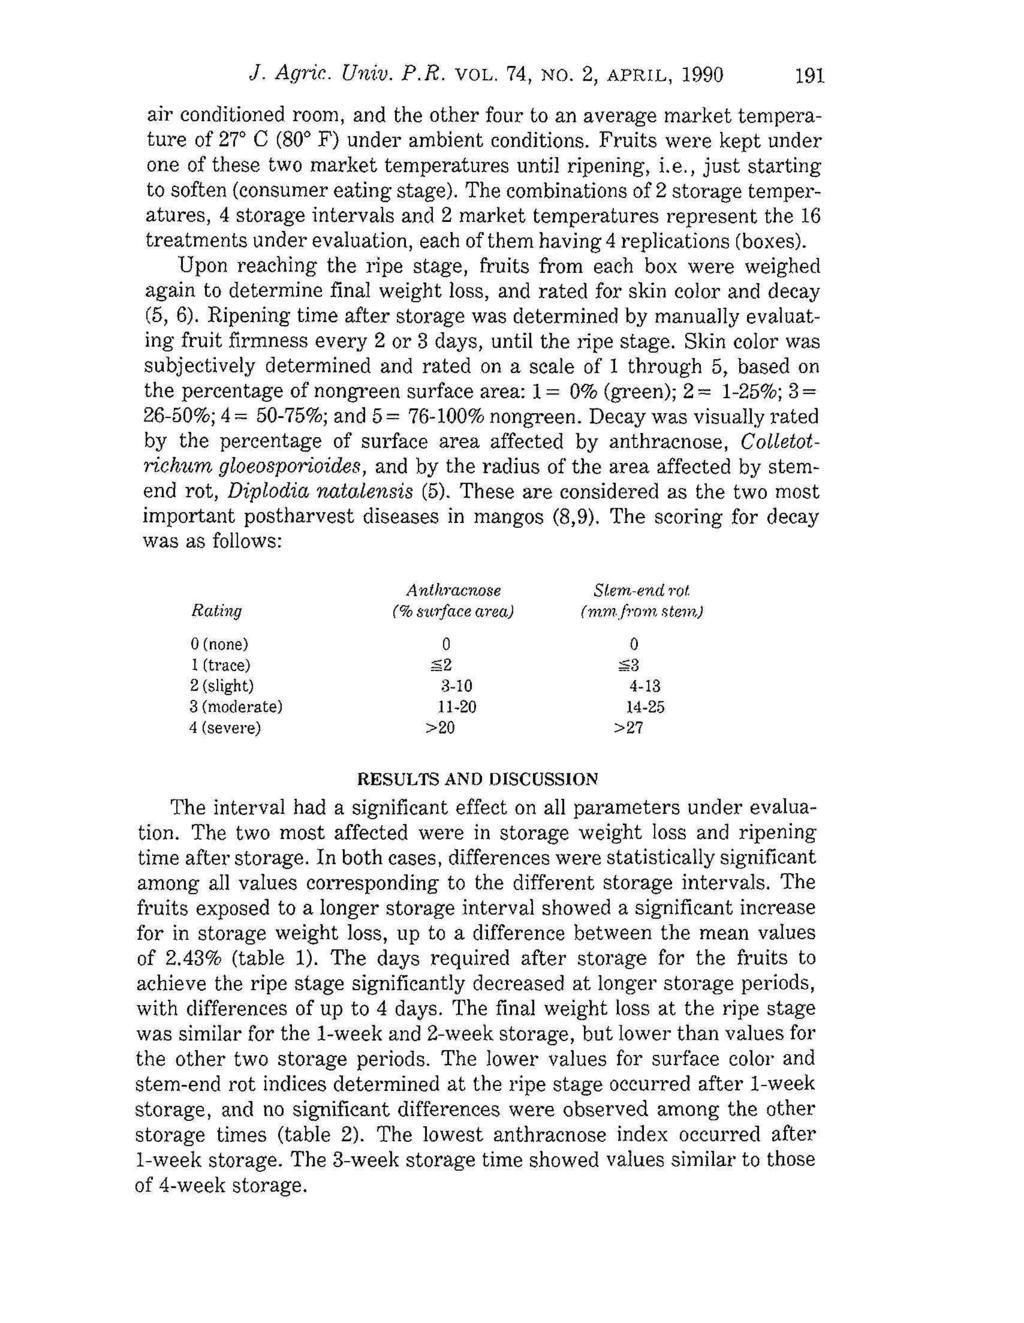 J. Agric. Univ. P.R, VOL. 74, NO. 2, APRIL, 1990 191 air conditioned room, and the other four to an average market temperature of 27 C (80 F) under ambient conditions.